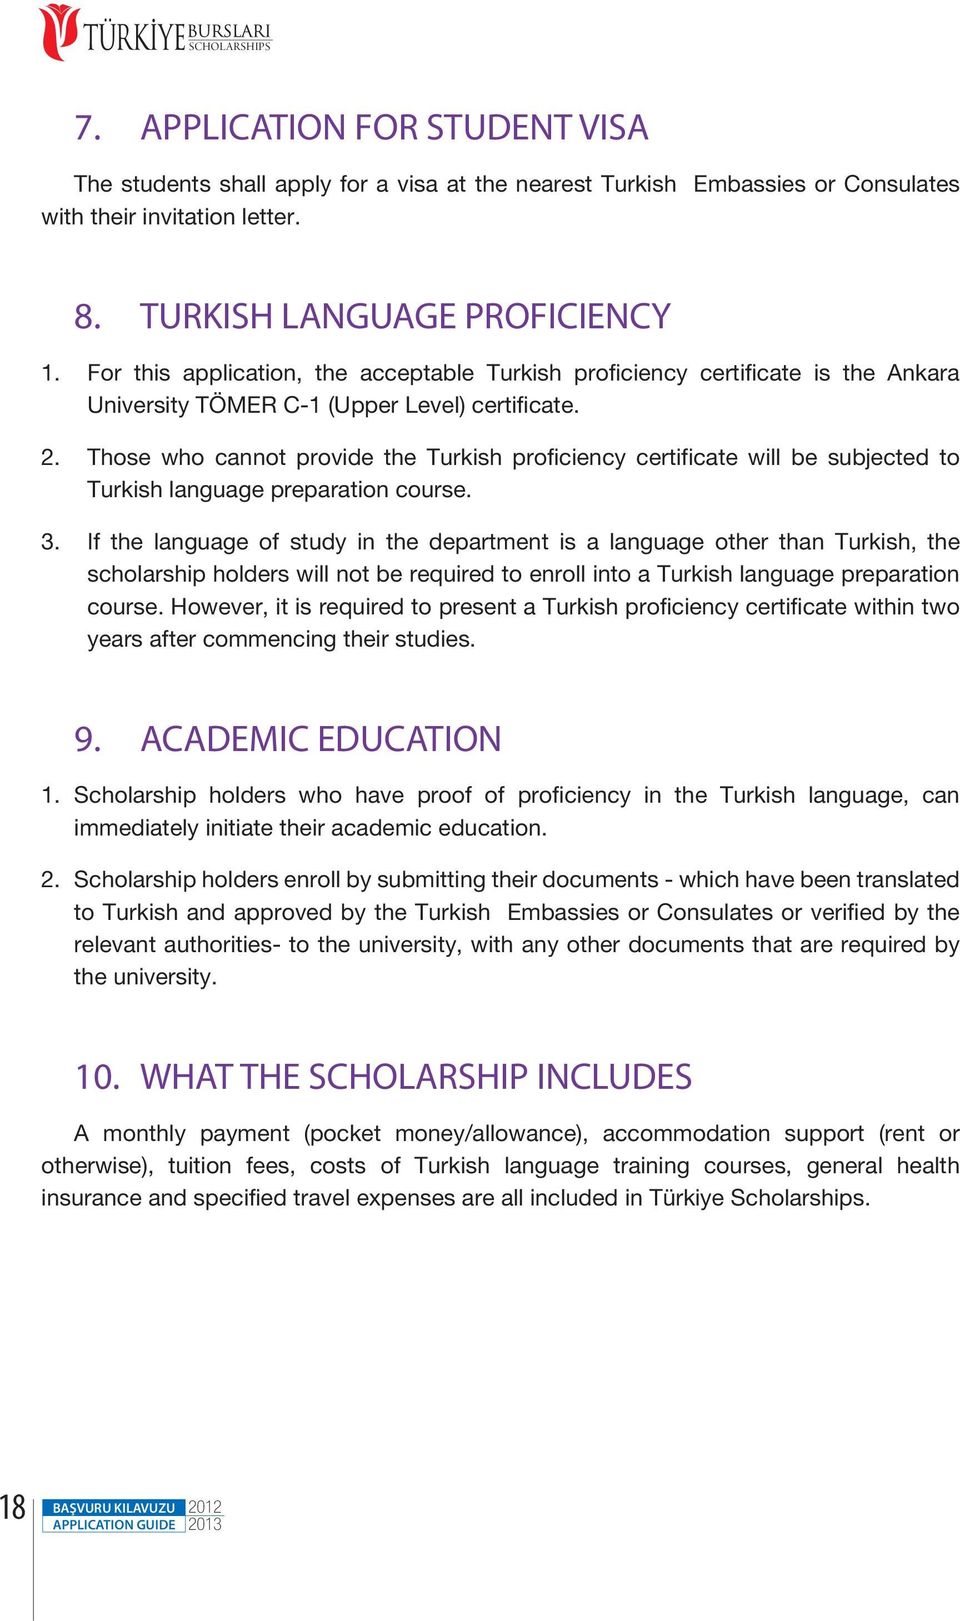 Those who cannot provide the Turkish proficiency certificate will be subjected to Turkish language preparation course. 3.